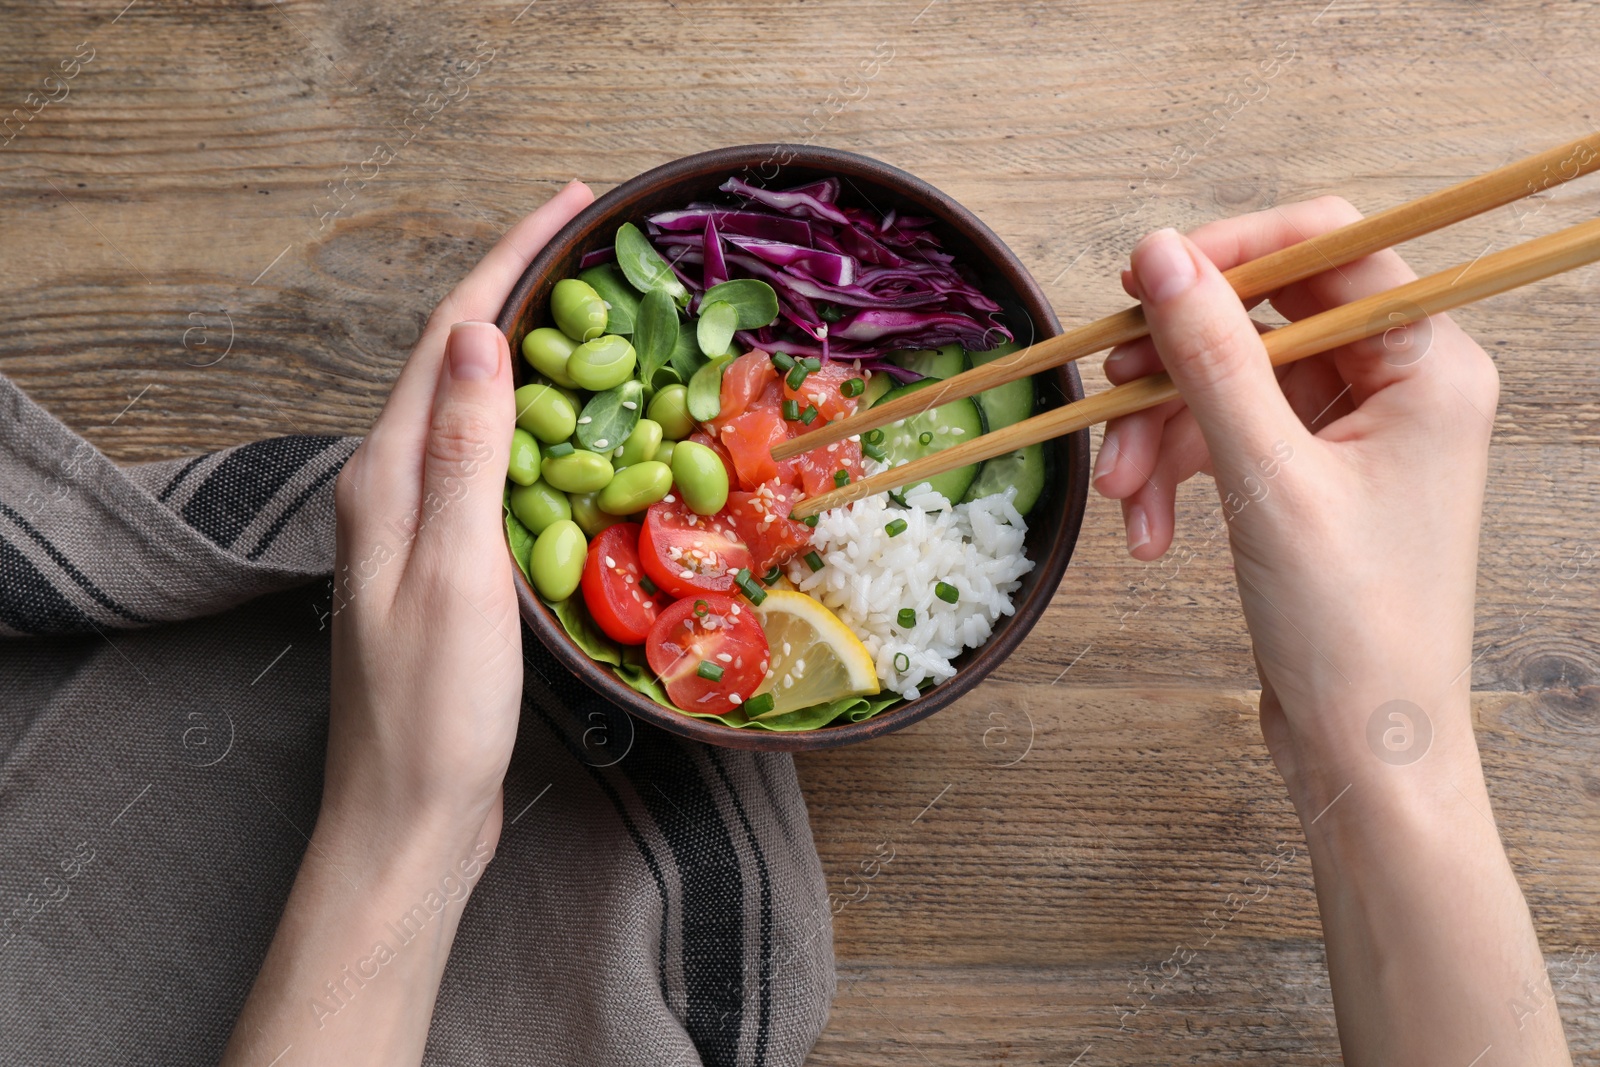 Photo of Woman eating poke bowl with salmon, edamame beans and vegetables at wooden table, top view